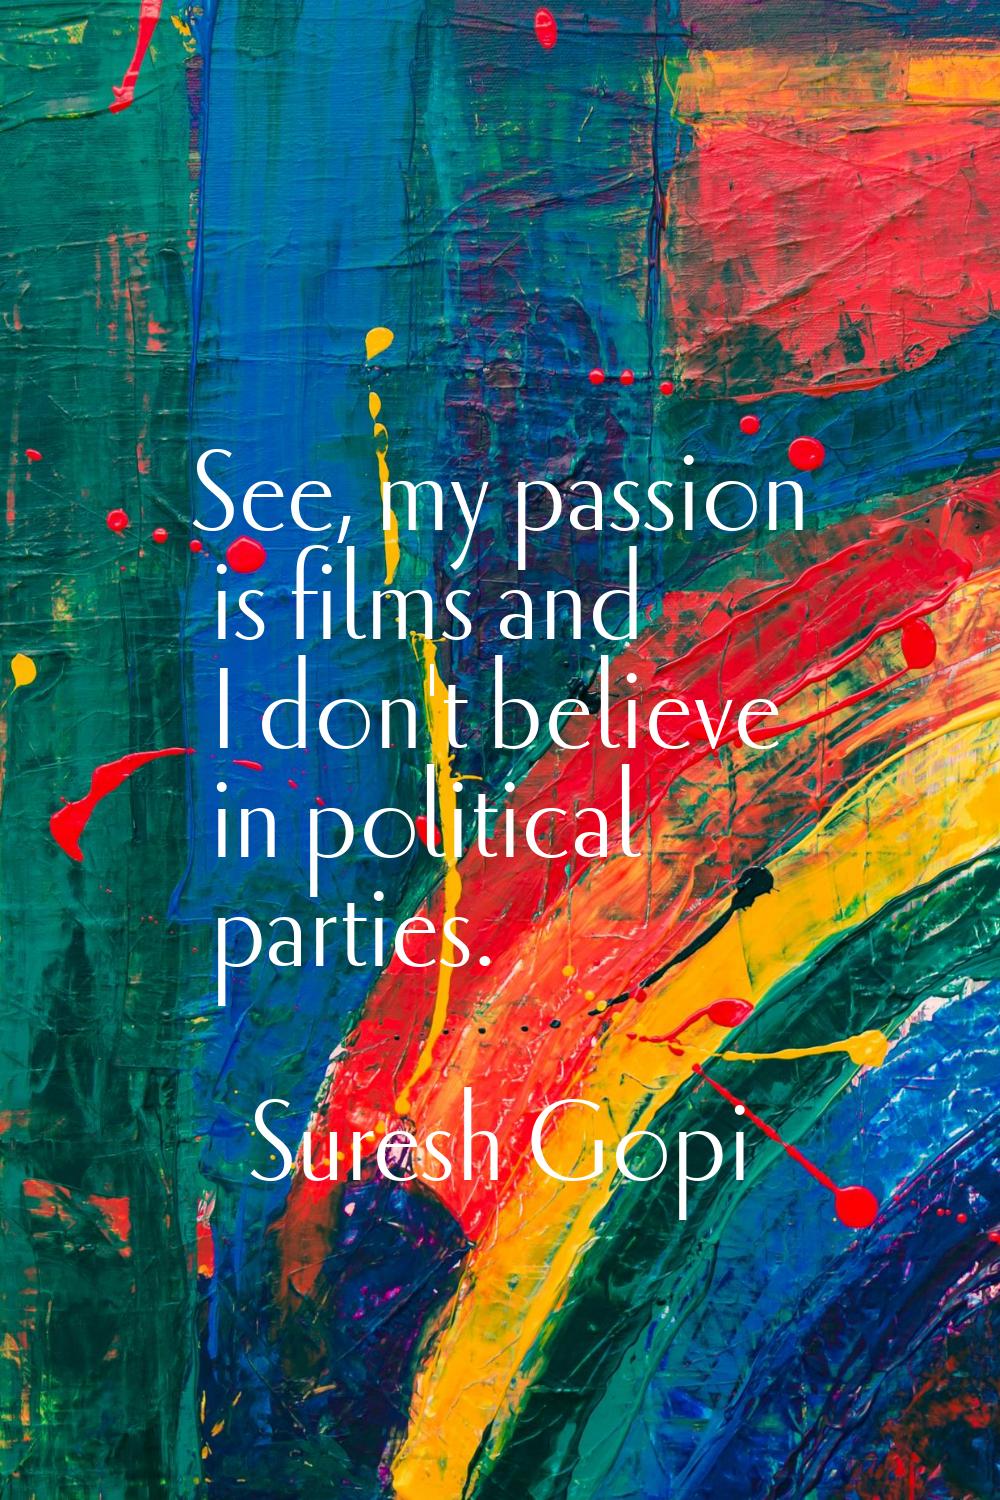 See, my passion is films and I don't believe in political parties.